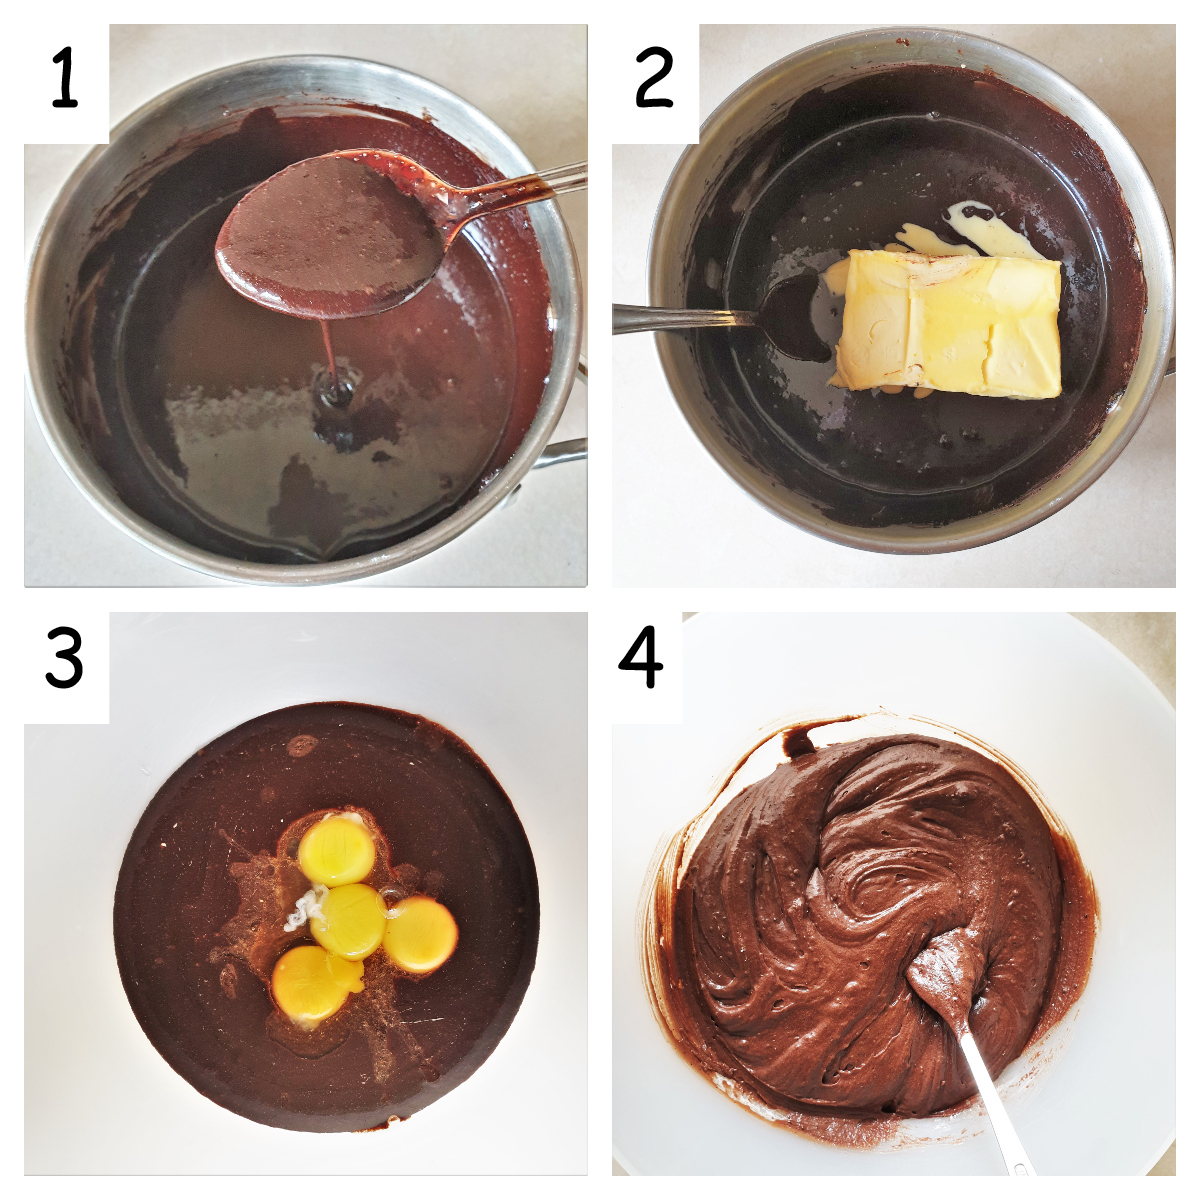 Collage of 4 images showing the cocoa and butter being melted and the eggs being added.